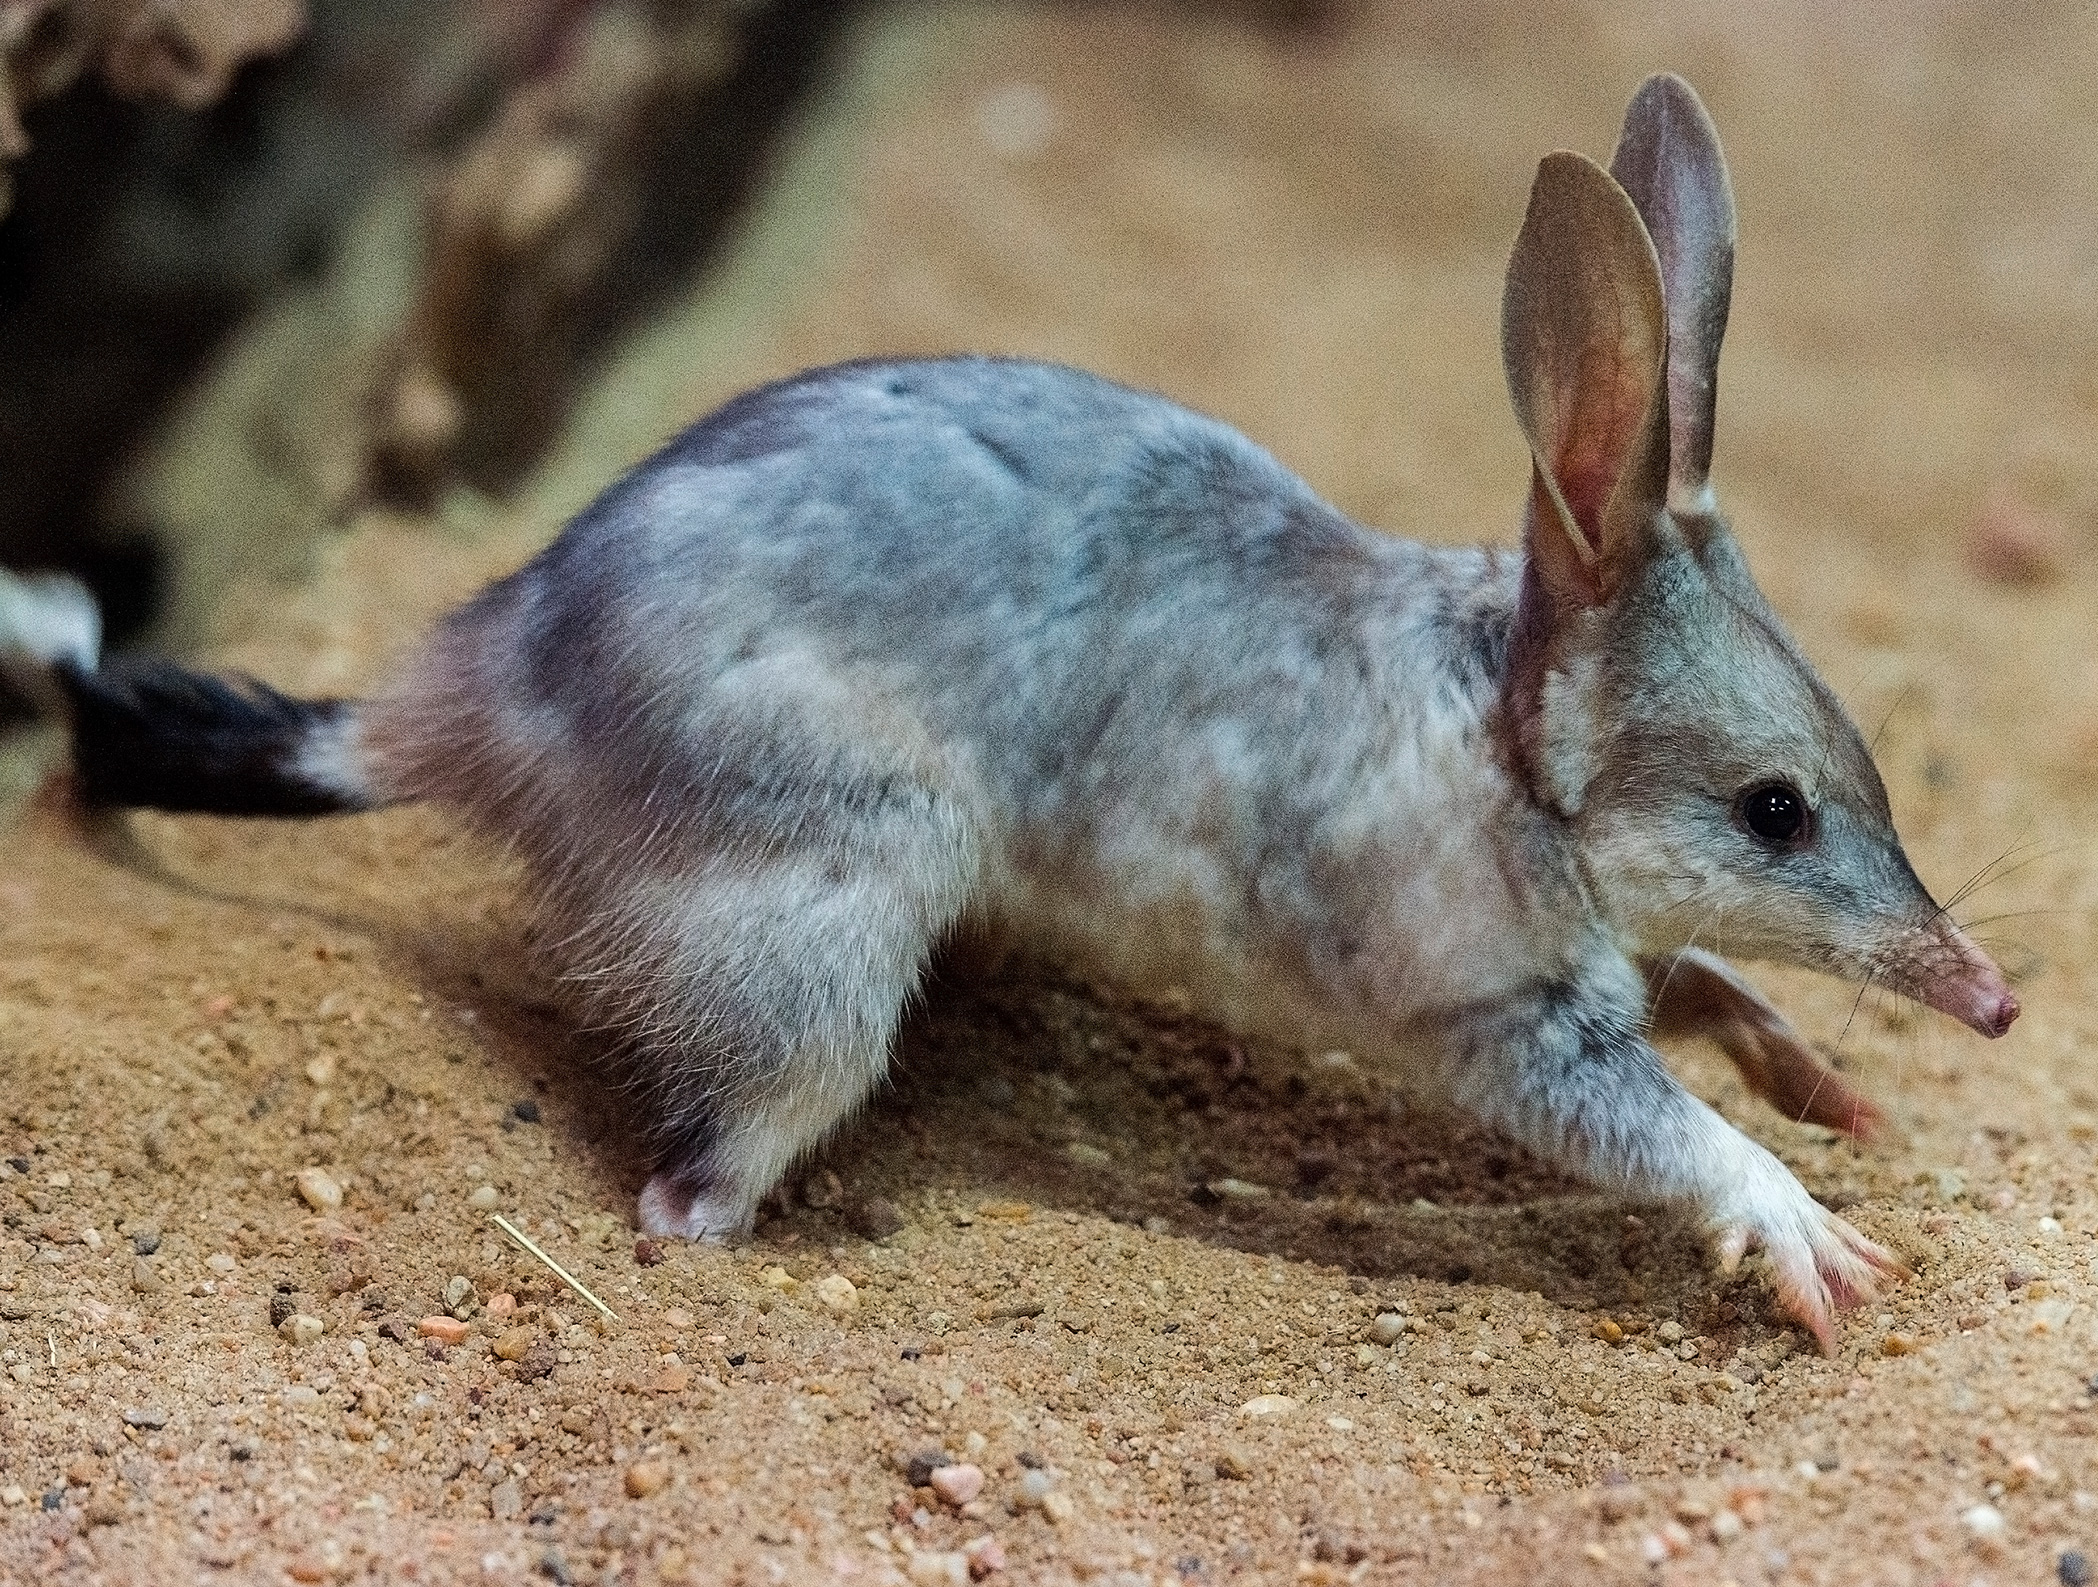 About Bilbies – Save the Bilby Fund